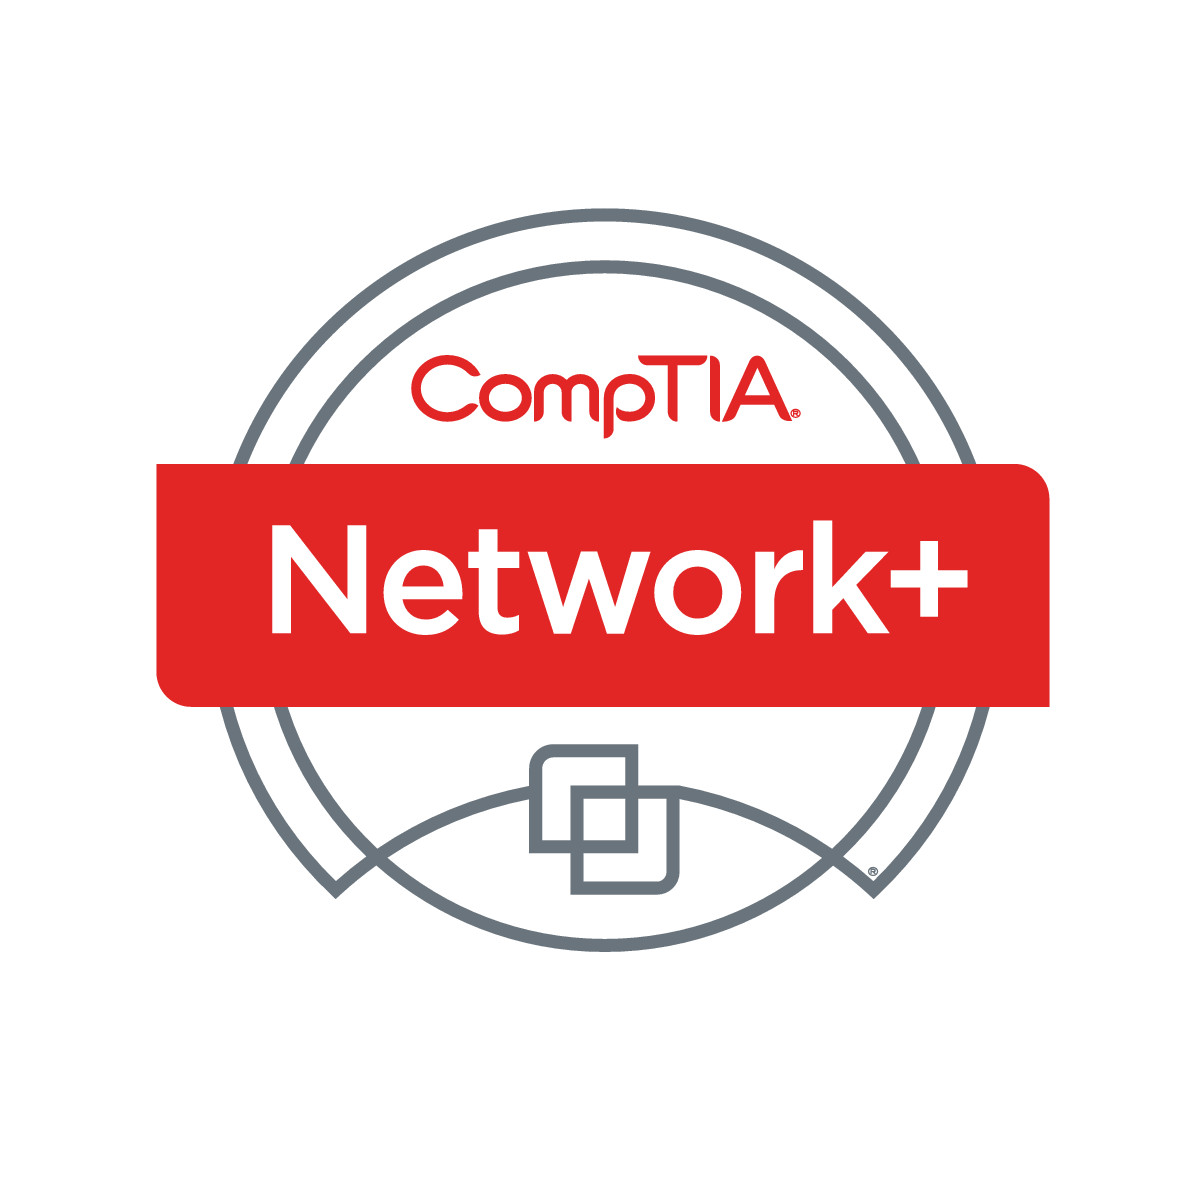 CompTIA Network+ (N10-007 Updated 2020)